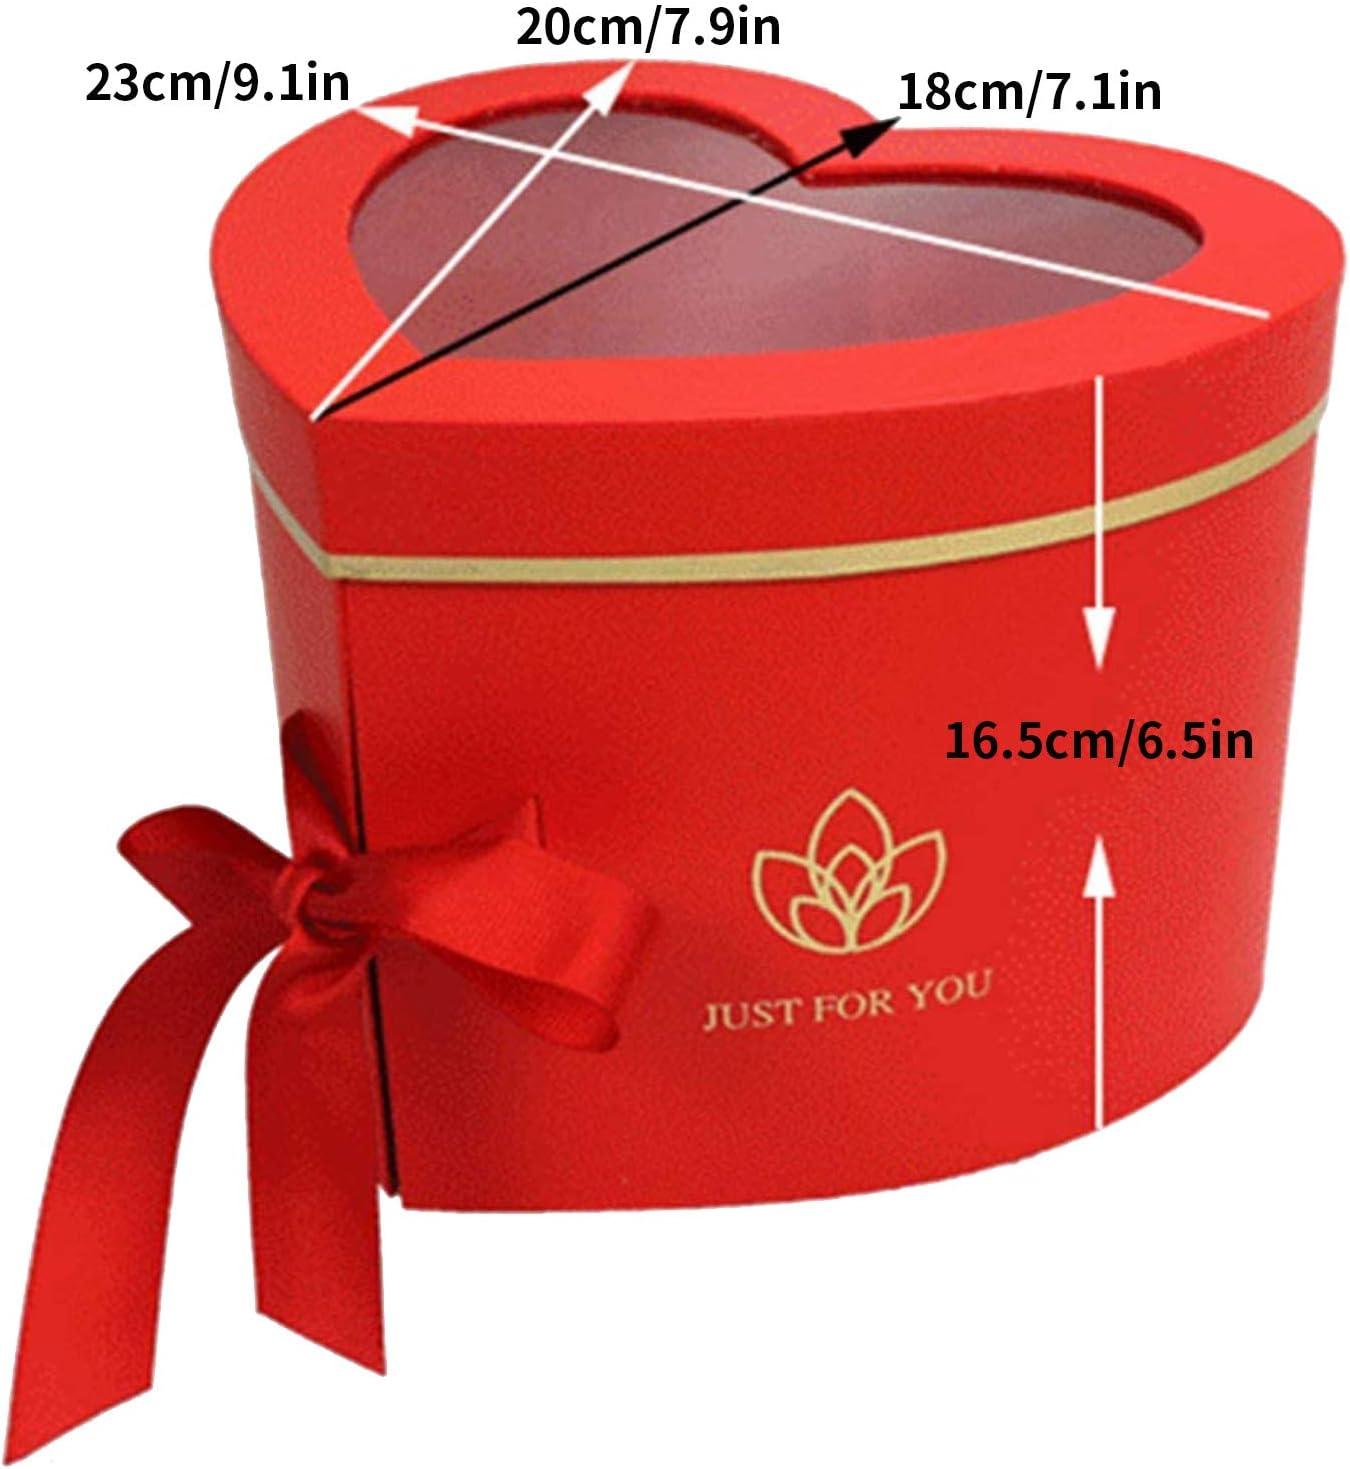 Double Layer Heart Shape Box for Flowers with Lids